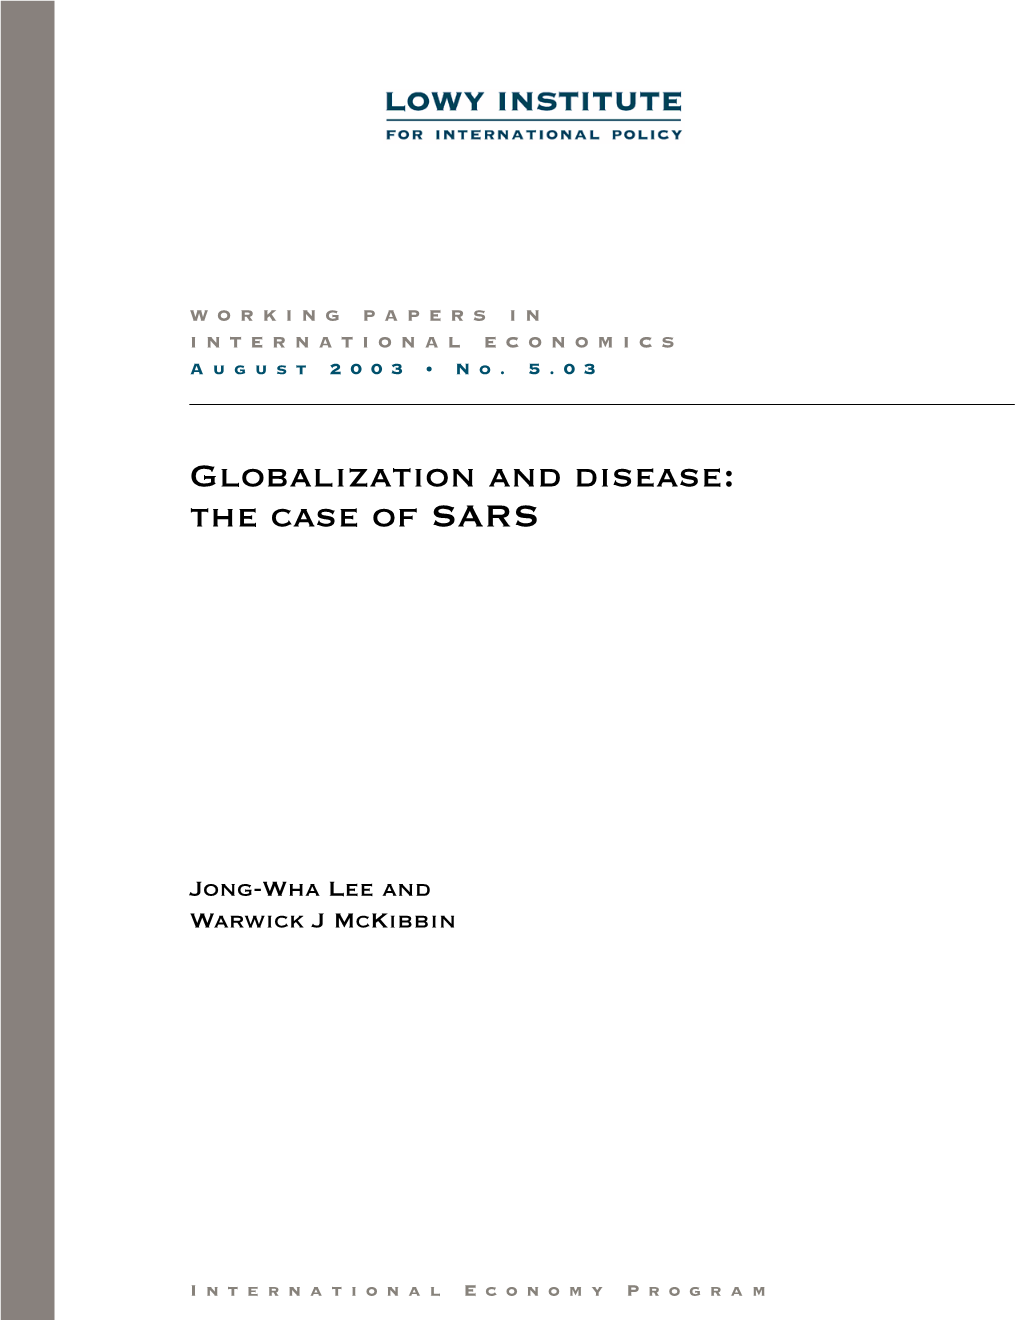 Globalization and Disease: the Case of SARS*